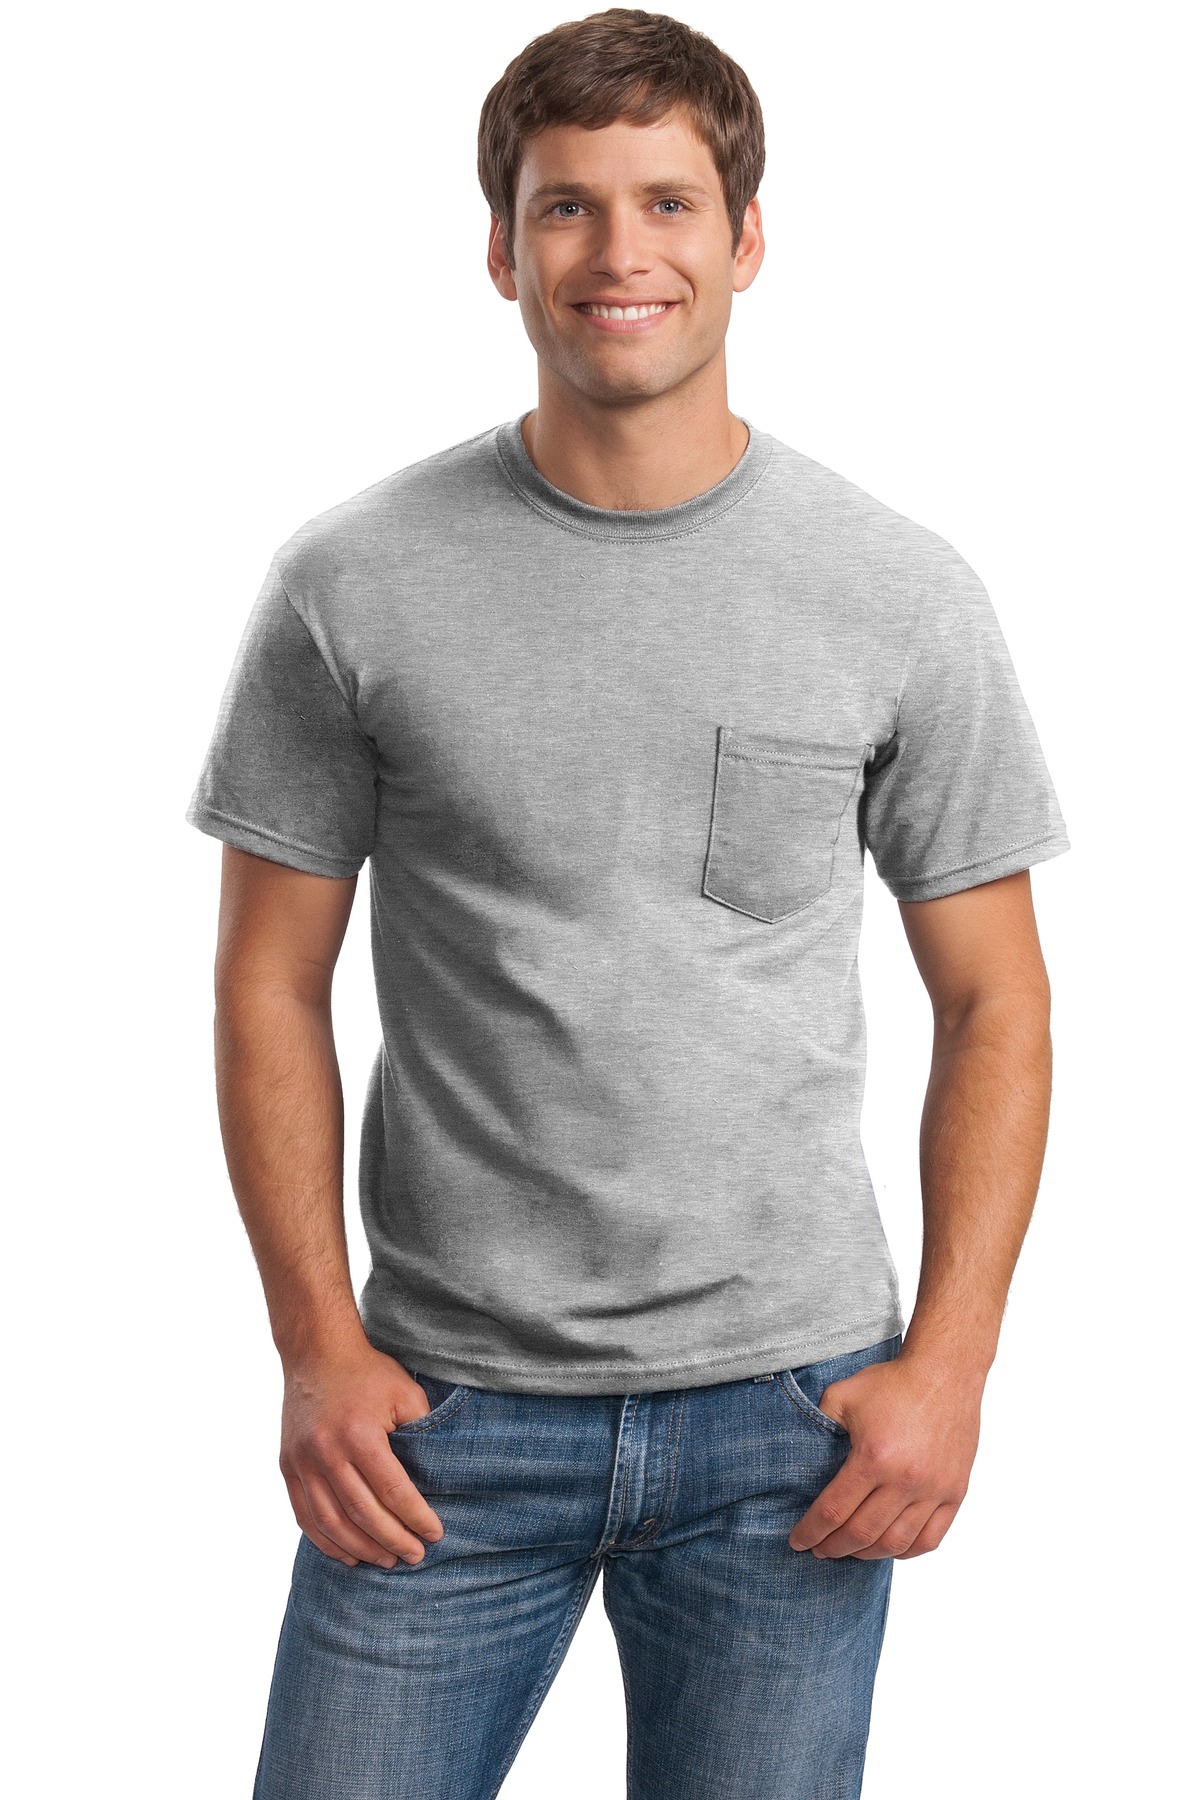 2300 Ultra Cotton 100% Cotton T-Shirt with Pocket